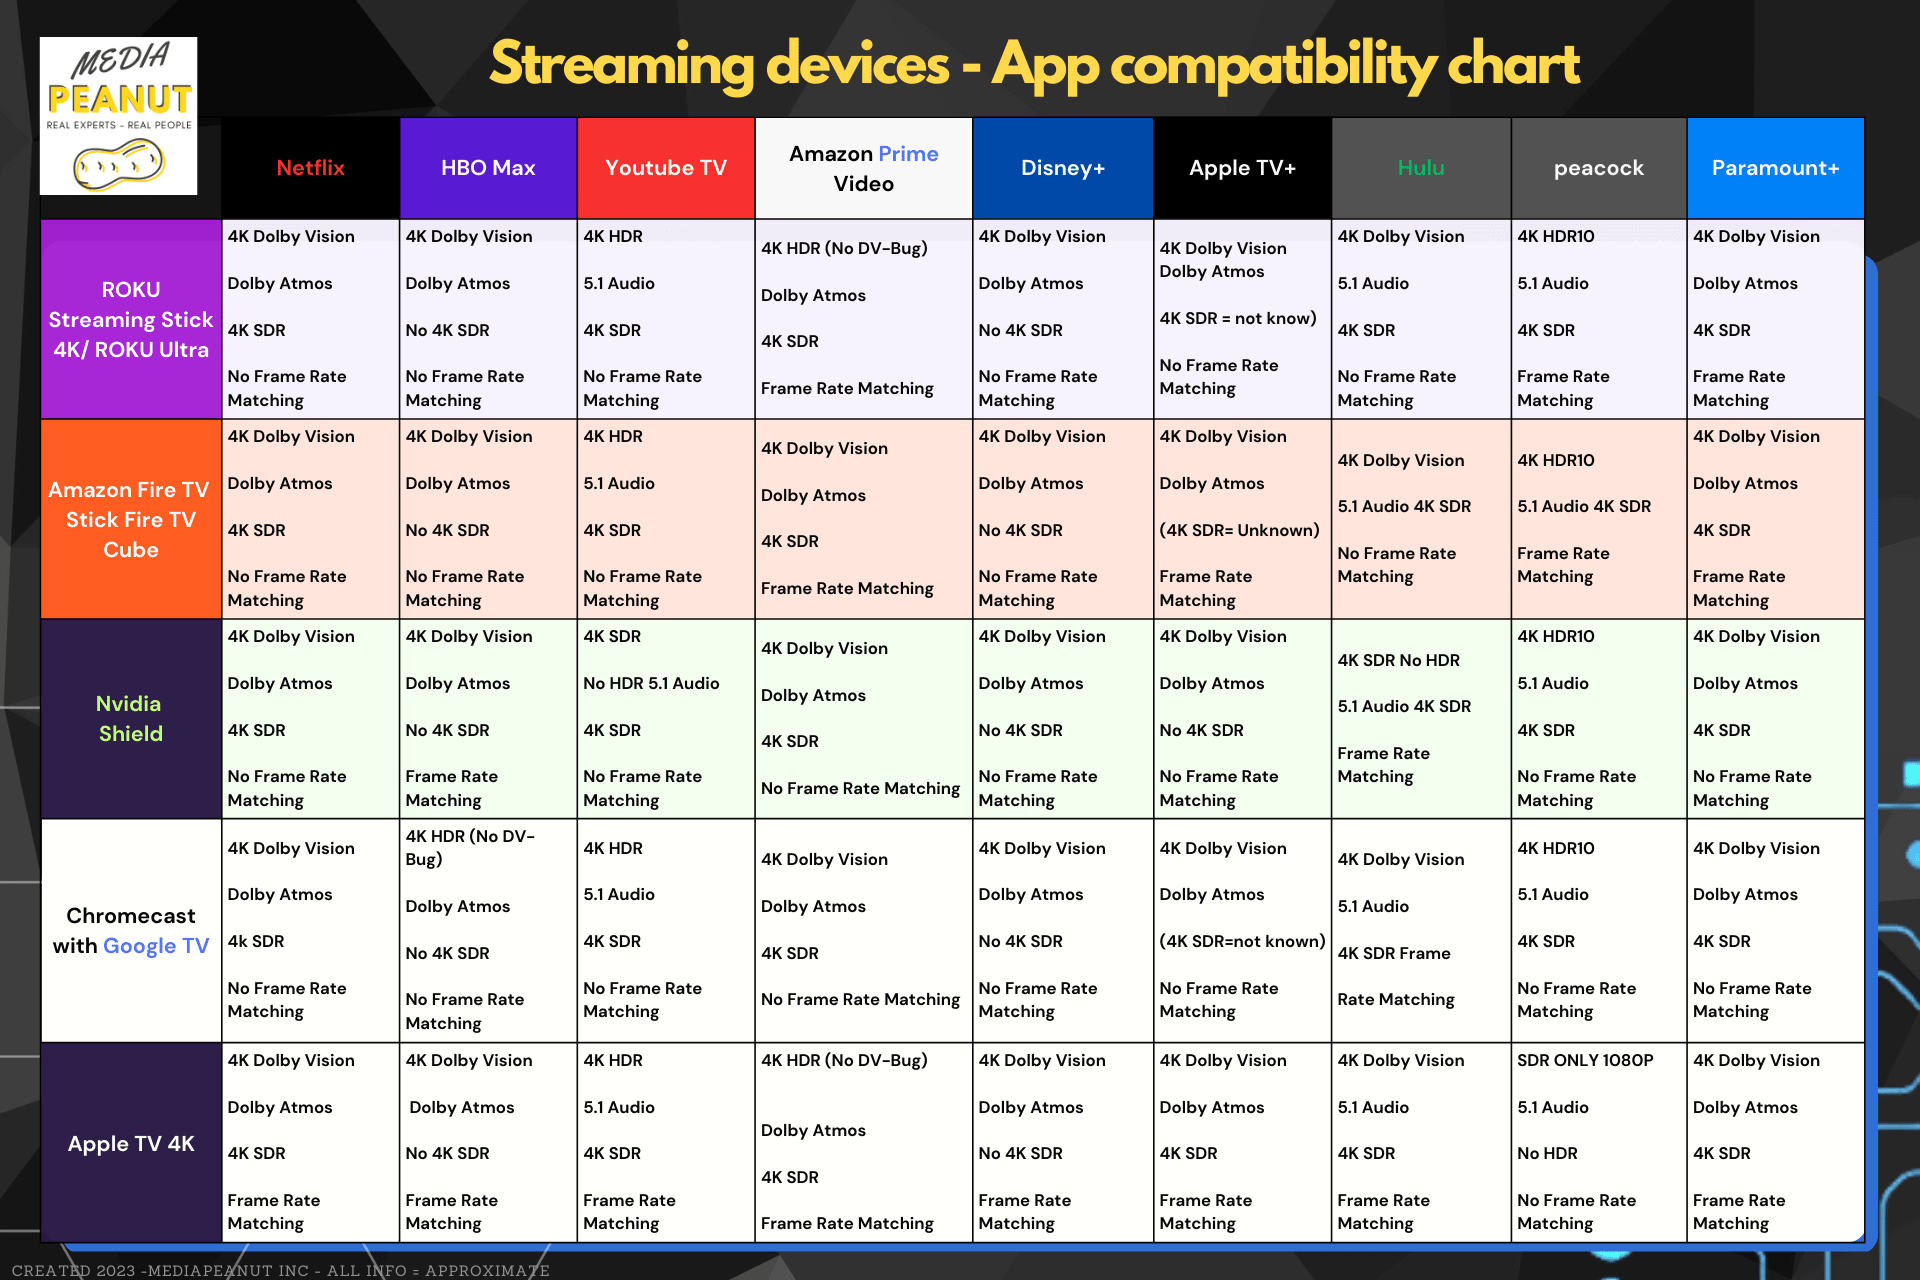 Here is a comparison chart we created showcasing device compatibility with various streaming apps (like netflix, youtube TV, and more). It covers roku, amazon fire tv stick, nvidia shield, chromecast with google tv, apple tv and more.